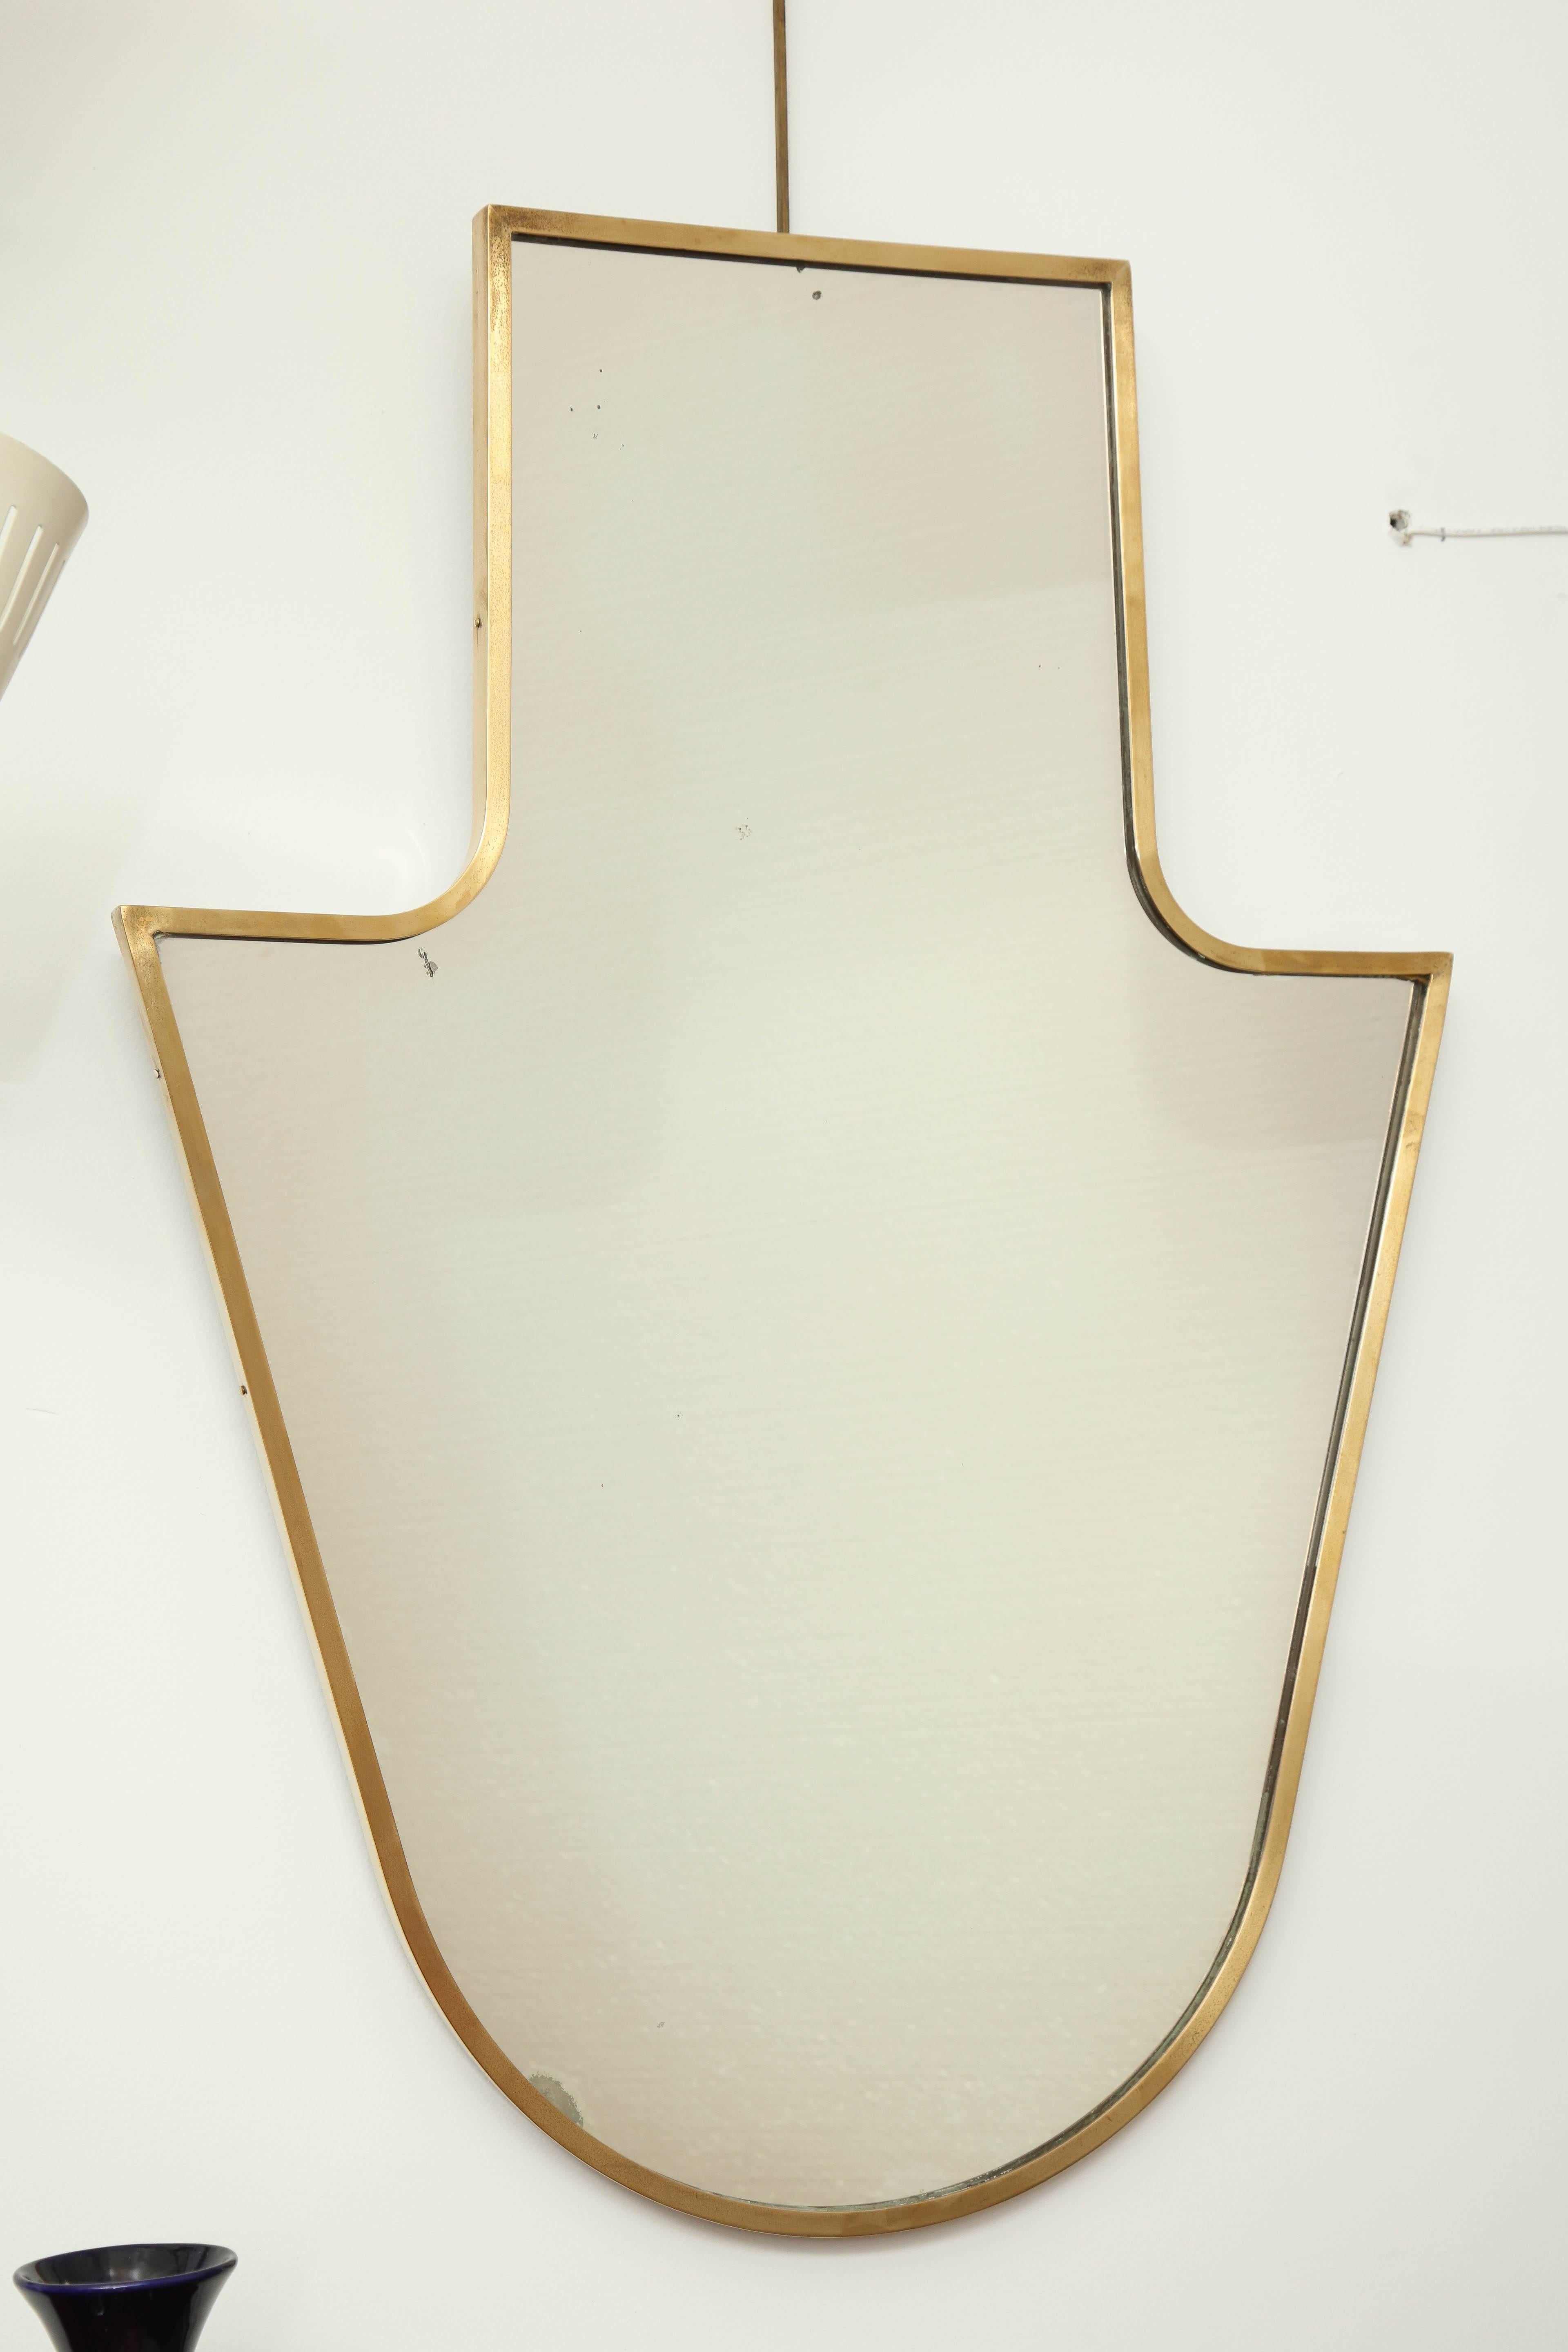 Brass shield shape framed mirror made in Italy 1940's, Gio Ponti style, great quality.
 